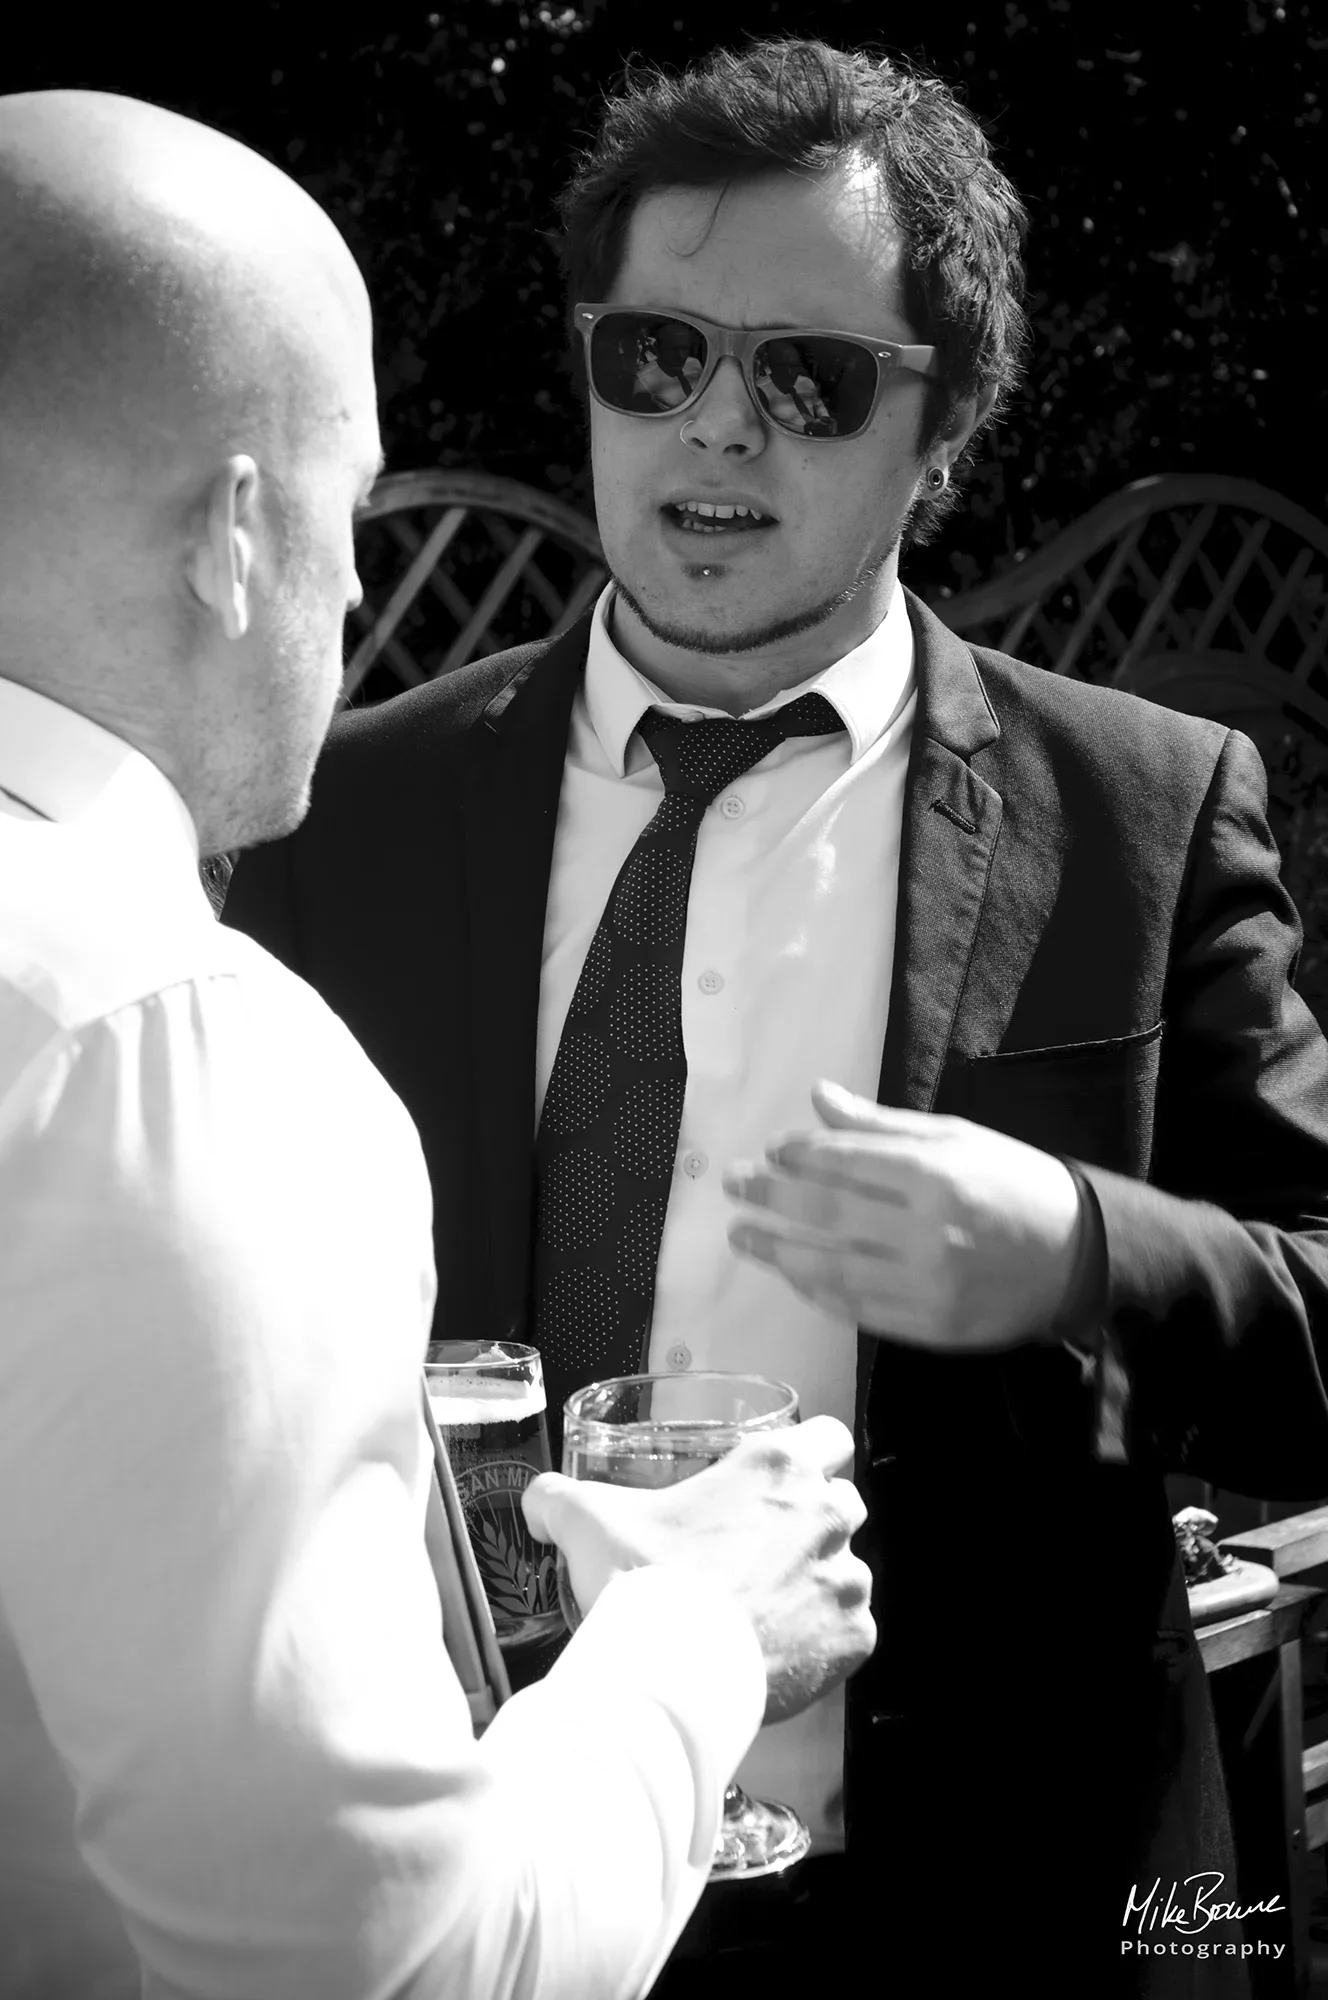 Man in sunglasses and dark suit talking to a man in a white shirt holding beers